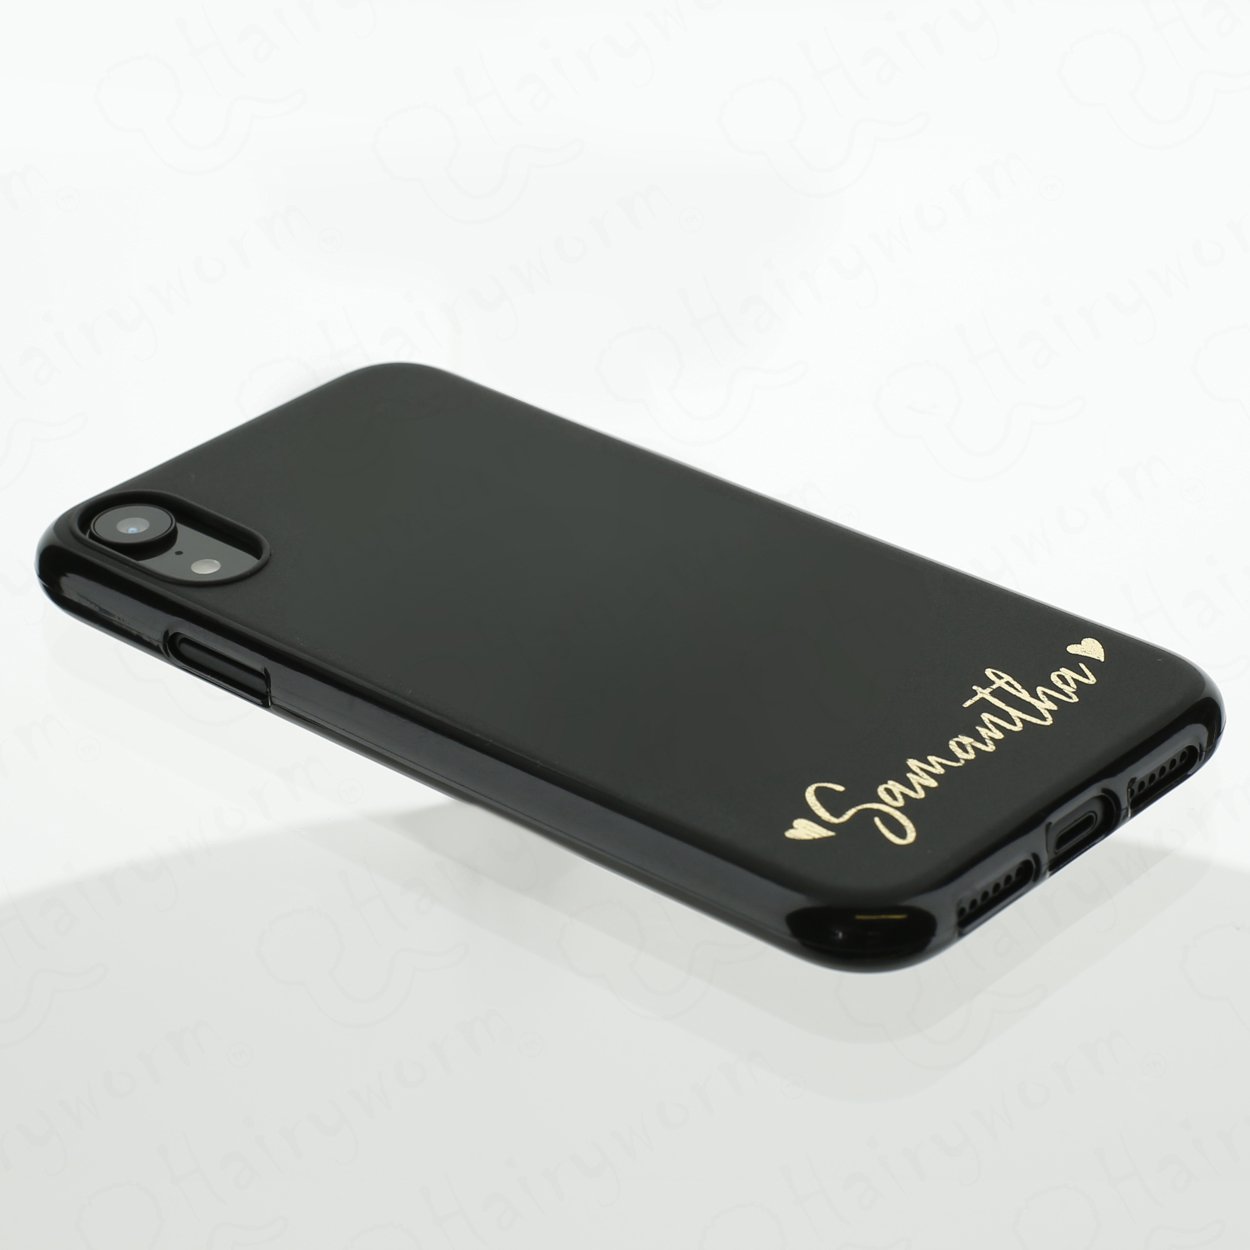 Personalised HTC Phone Gel Case with Classic Initials Under a Large Crown